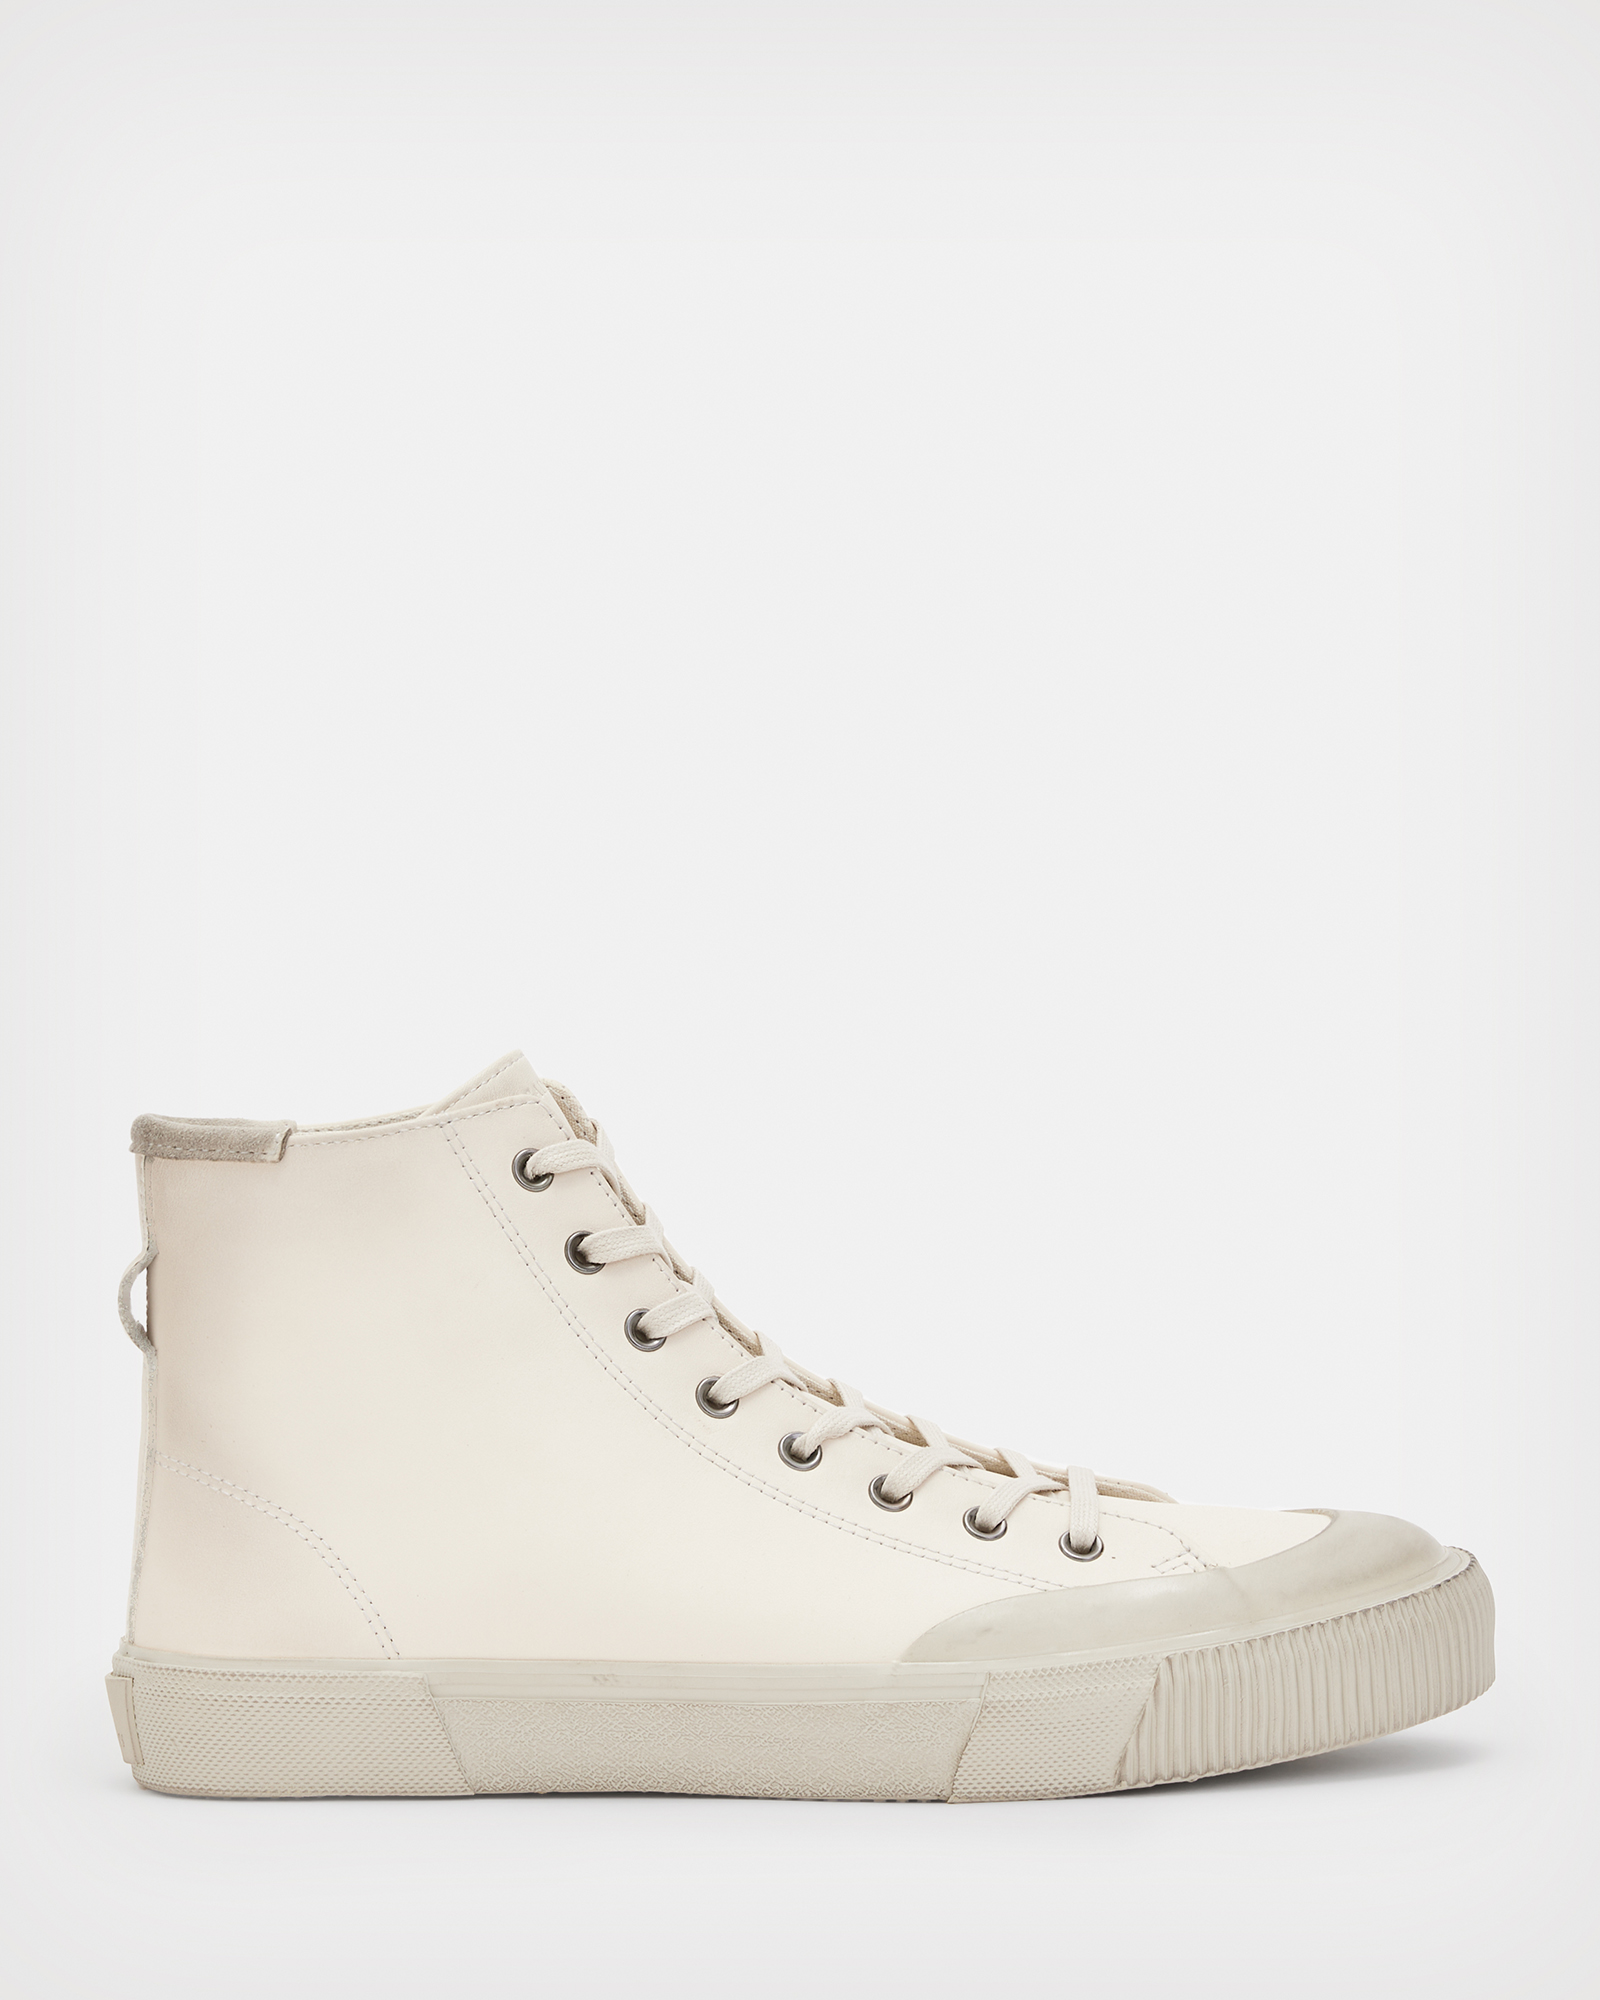 AllSaints Dumont Leather High Top Trainers